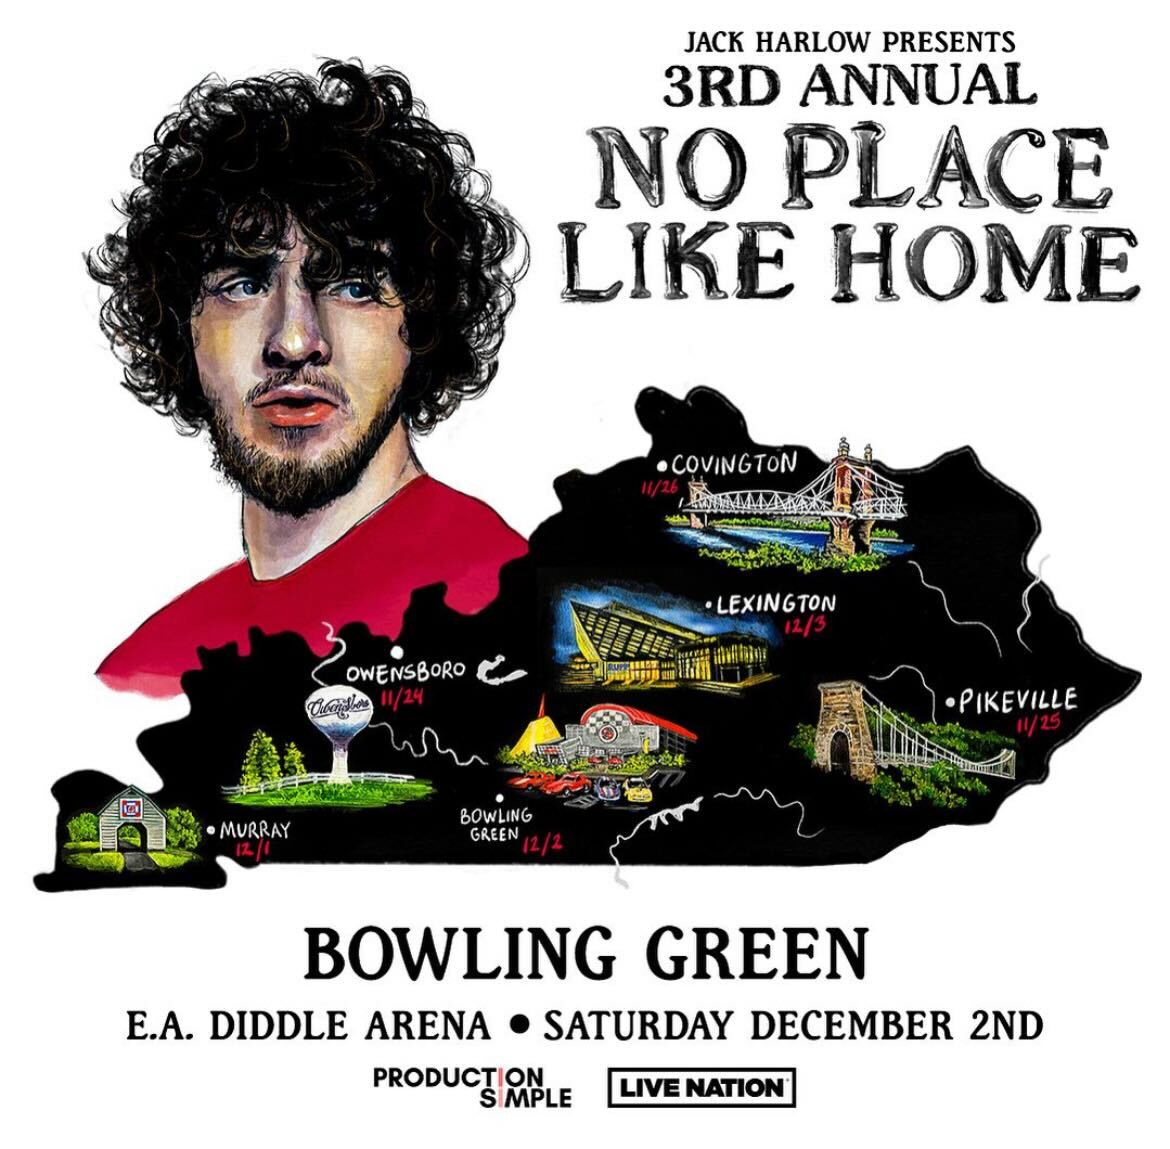 Jack Harlow to perform at Diddle Arena in December